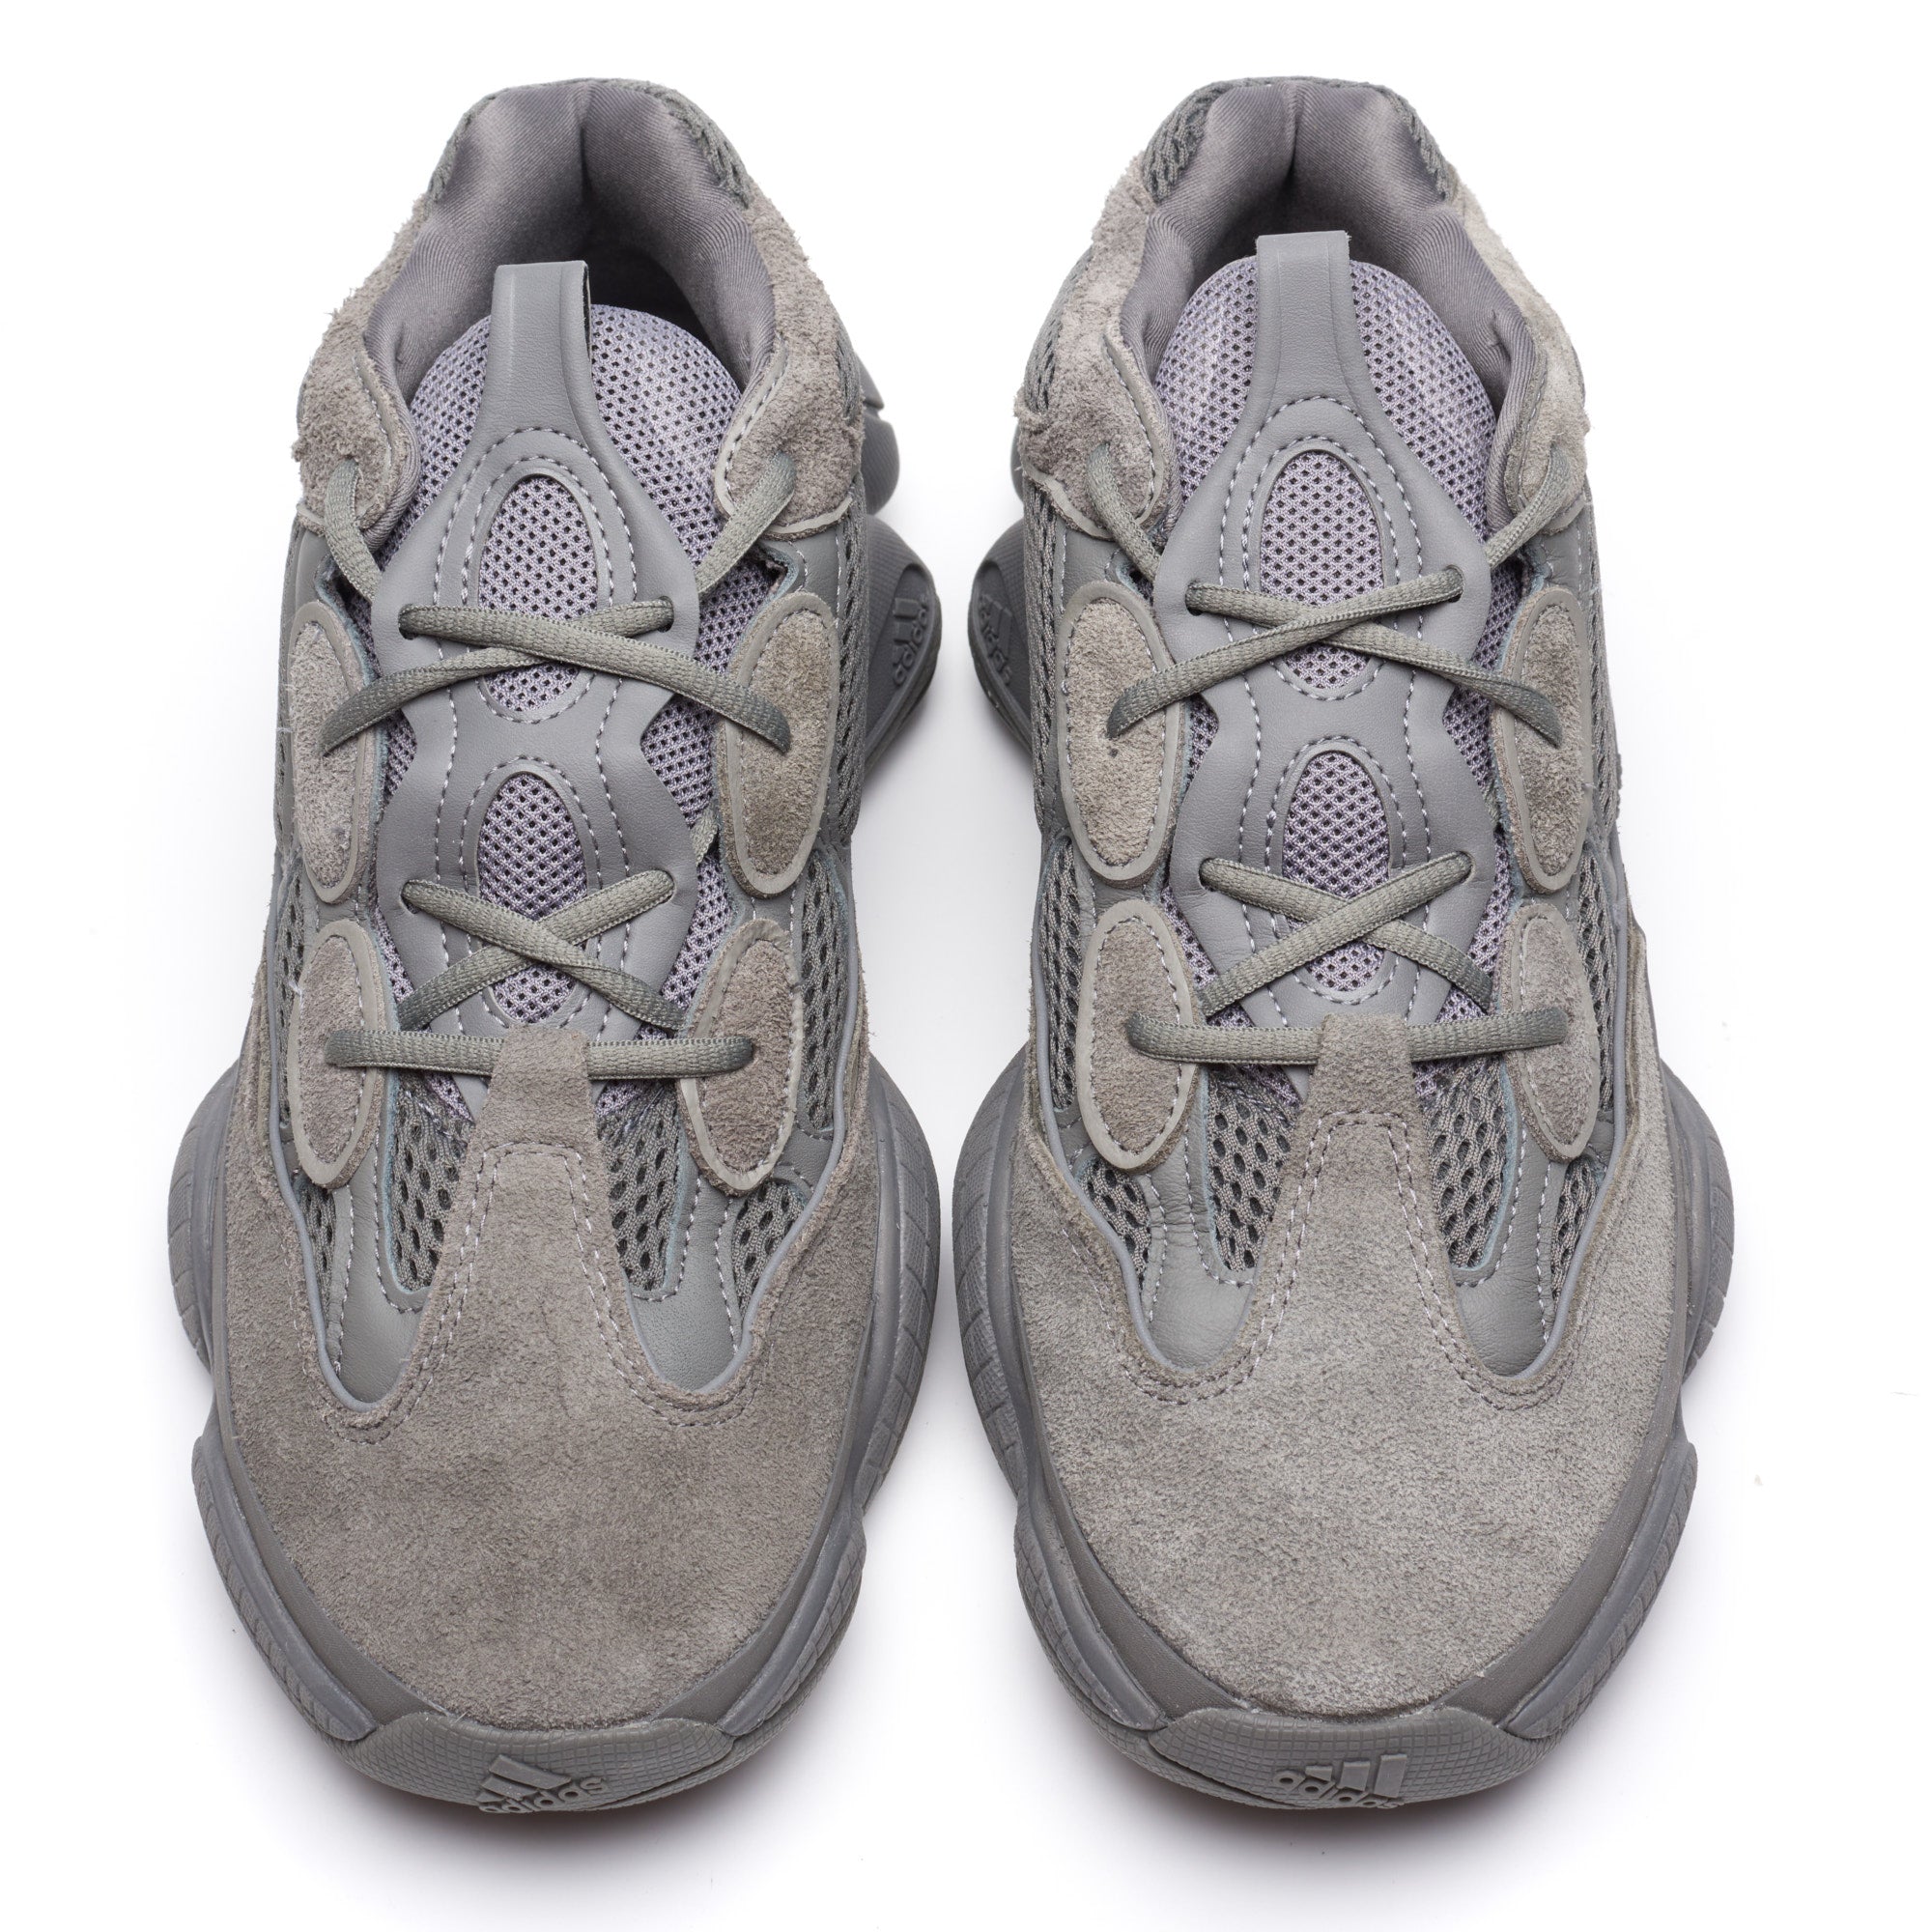 ADIDAS YEEZY 500 Granite Gray Sneakers Shoes UK 10 US 10.5 NEW with Box ADIDAS